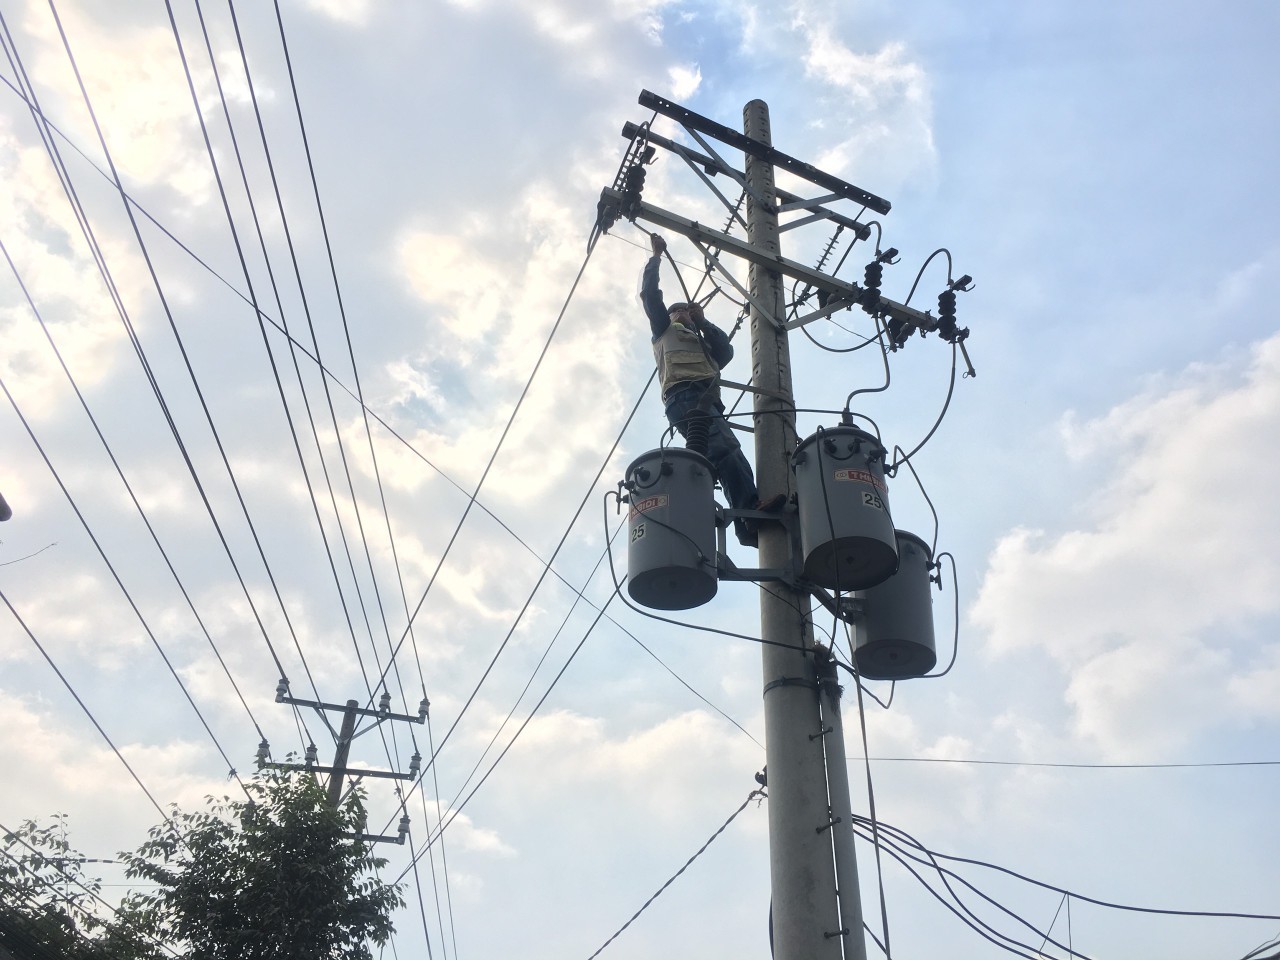 Quang Anh CGTE build pole mounted transformers to fit specific applications from 3x15KVA through 3x100KVA, with primary voltage ratings up to 22kv. In addition, we have single-phase pole-type transformers from 15KVA to 100KVA.